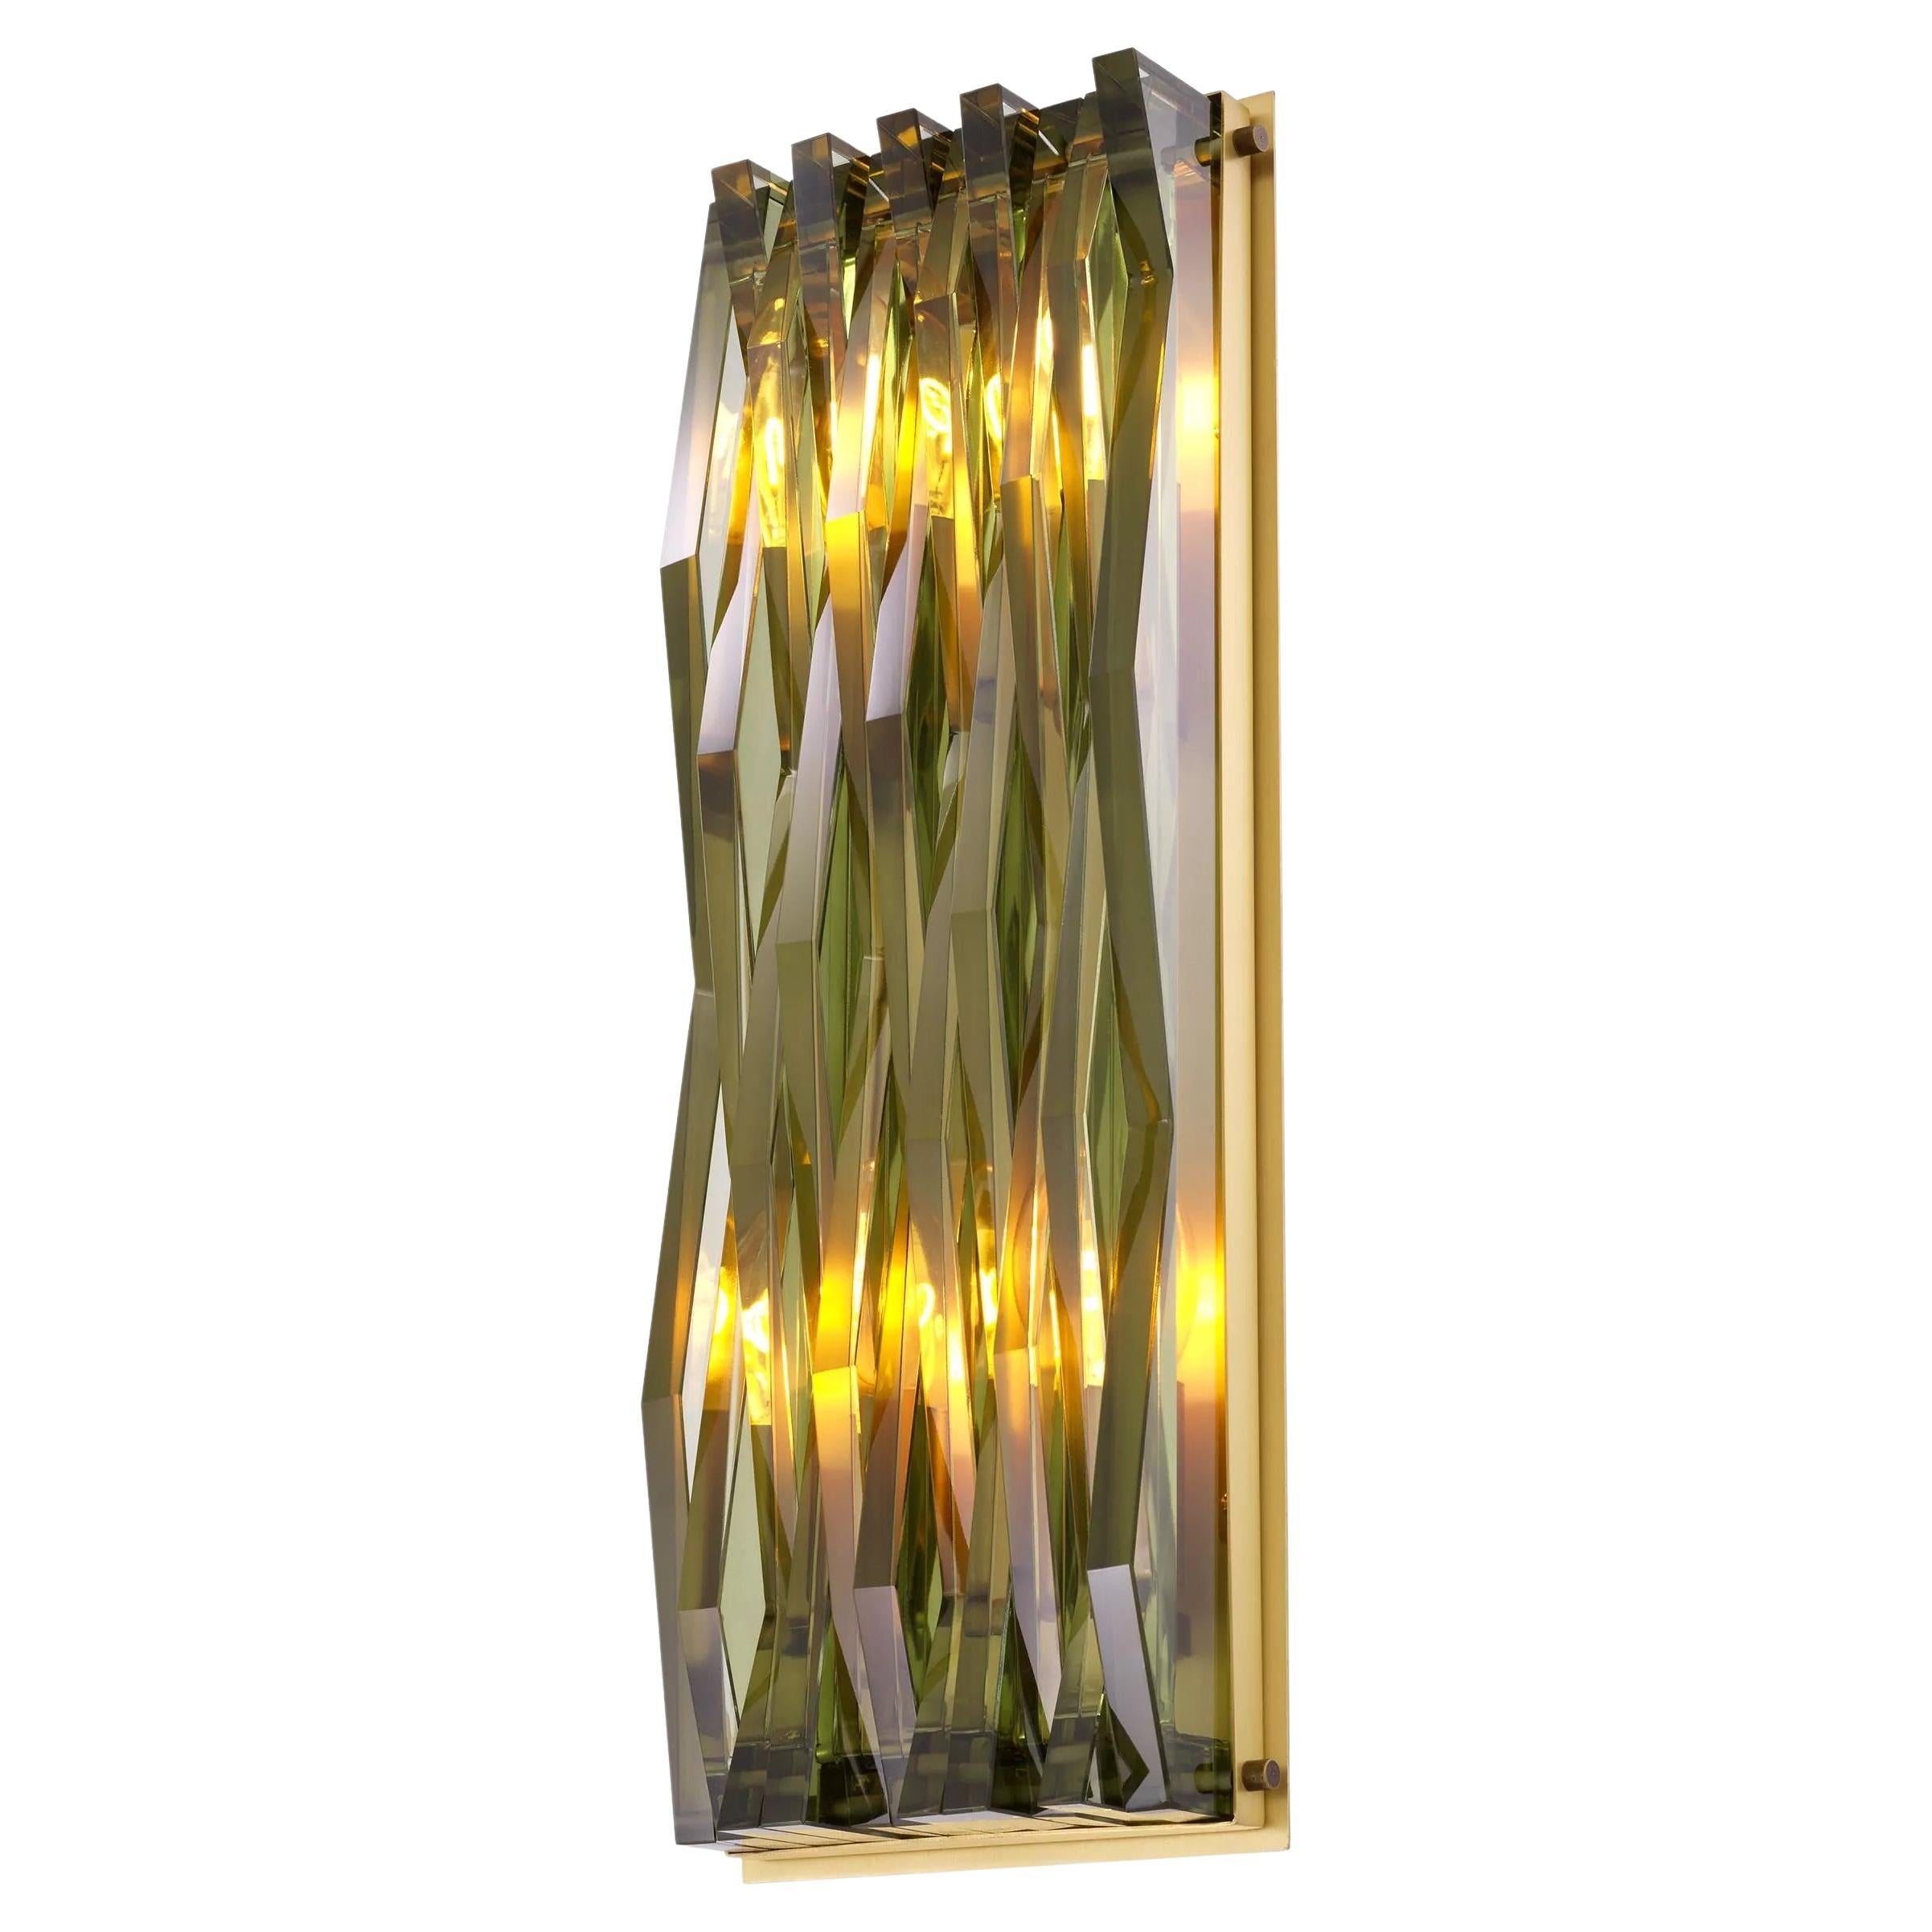 1960s-1970s Italian Design And Brutalist Style Brass and Glass Wall Light